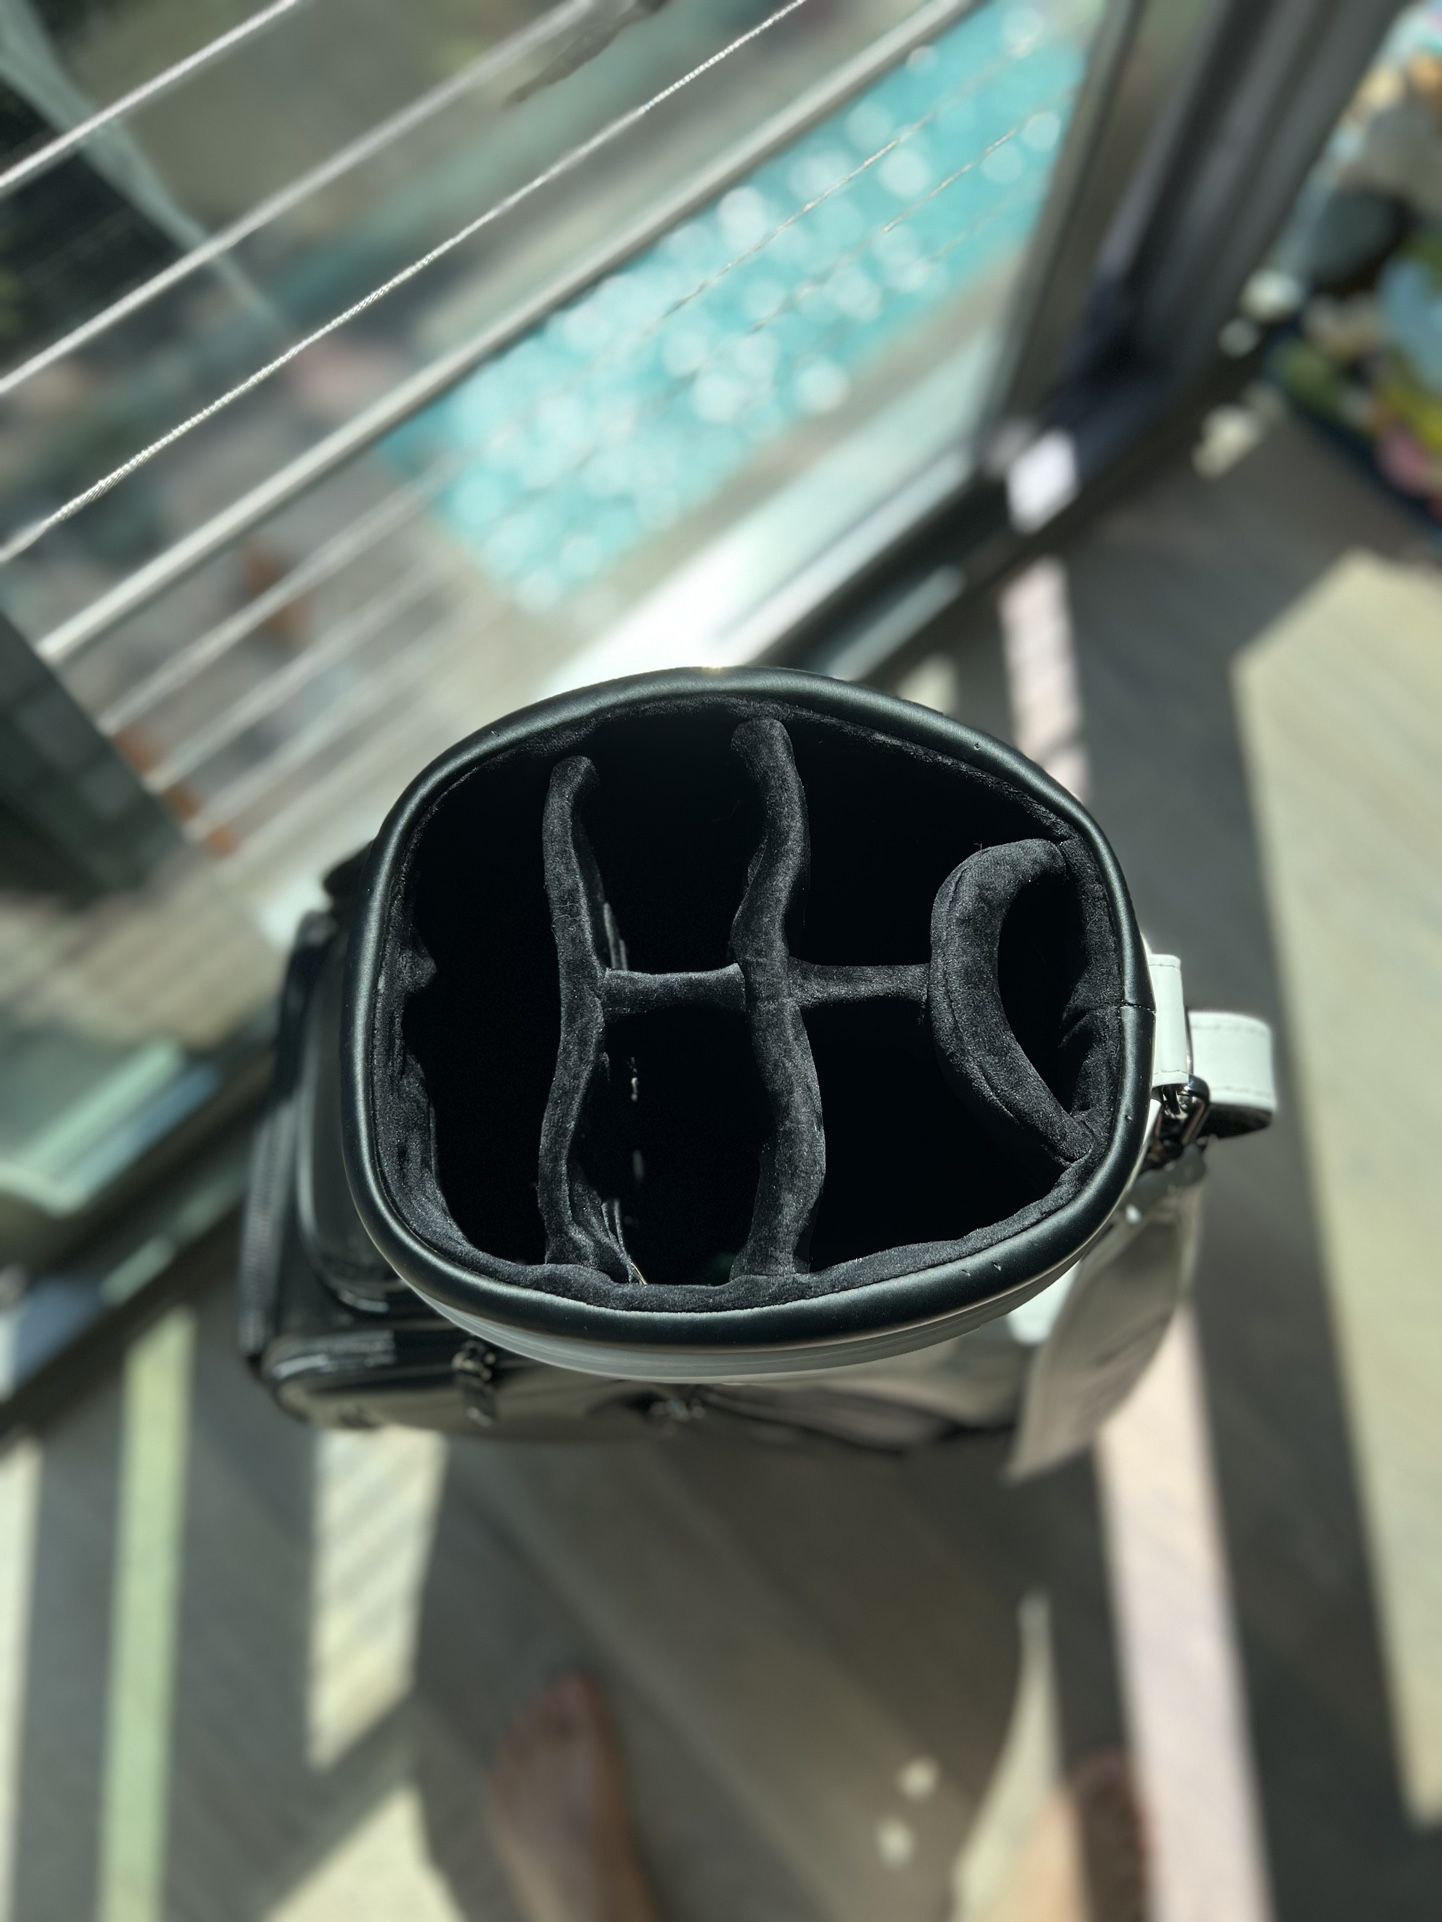 Vessel Prodigy Mini Staff Bag for Sale in Los Angeles, CA - OfferUp